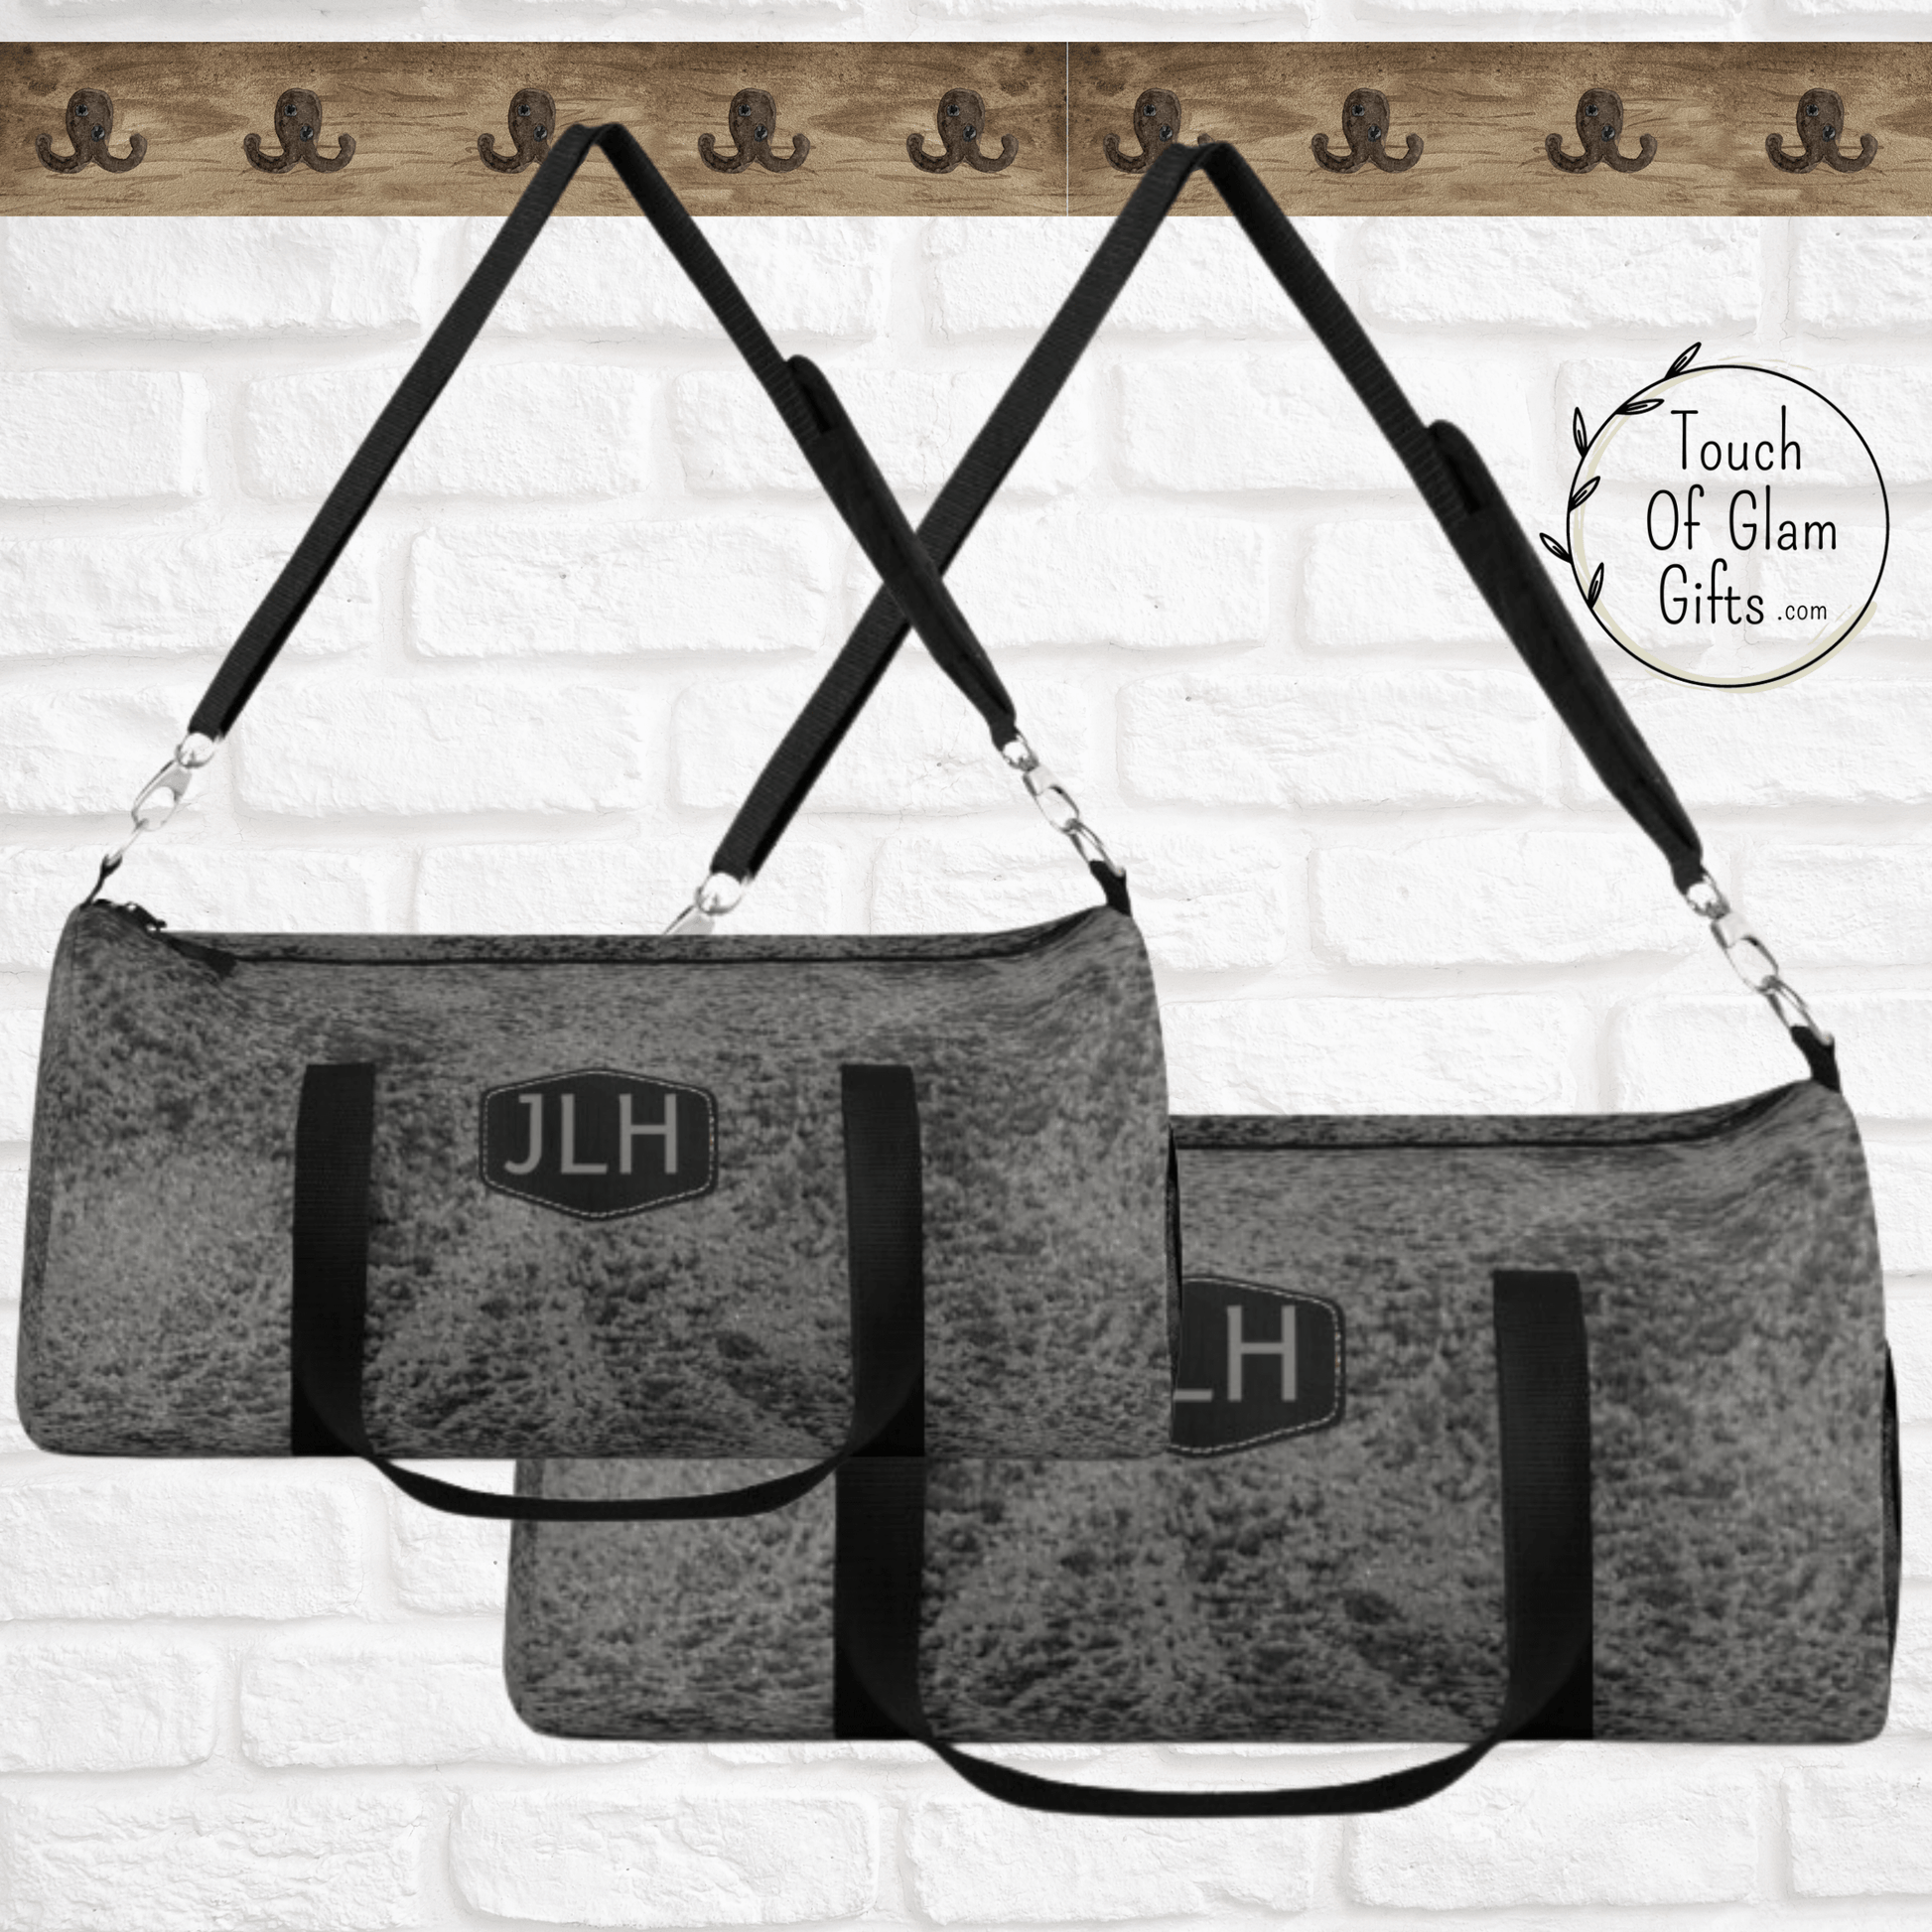 Mens monogrammed grey duffel bag comes in large and small carry on size. The large duffel bag is the perfect weekend bag for guys and the small is perfect for a carry on bag.